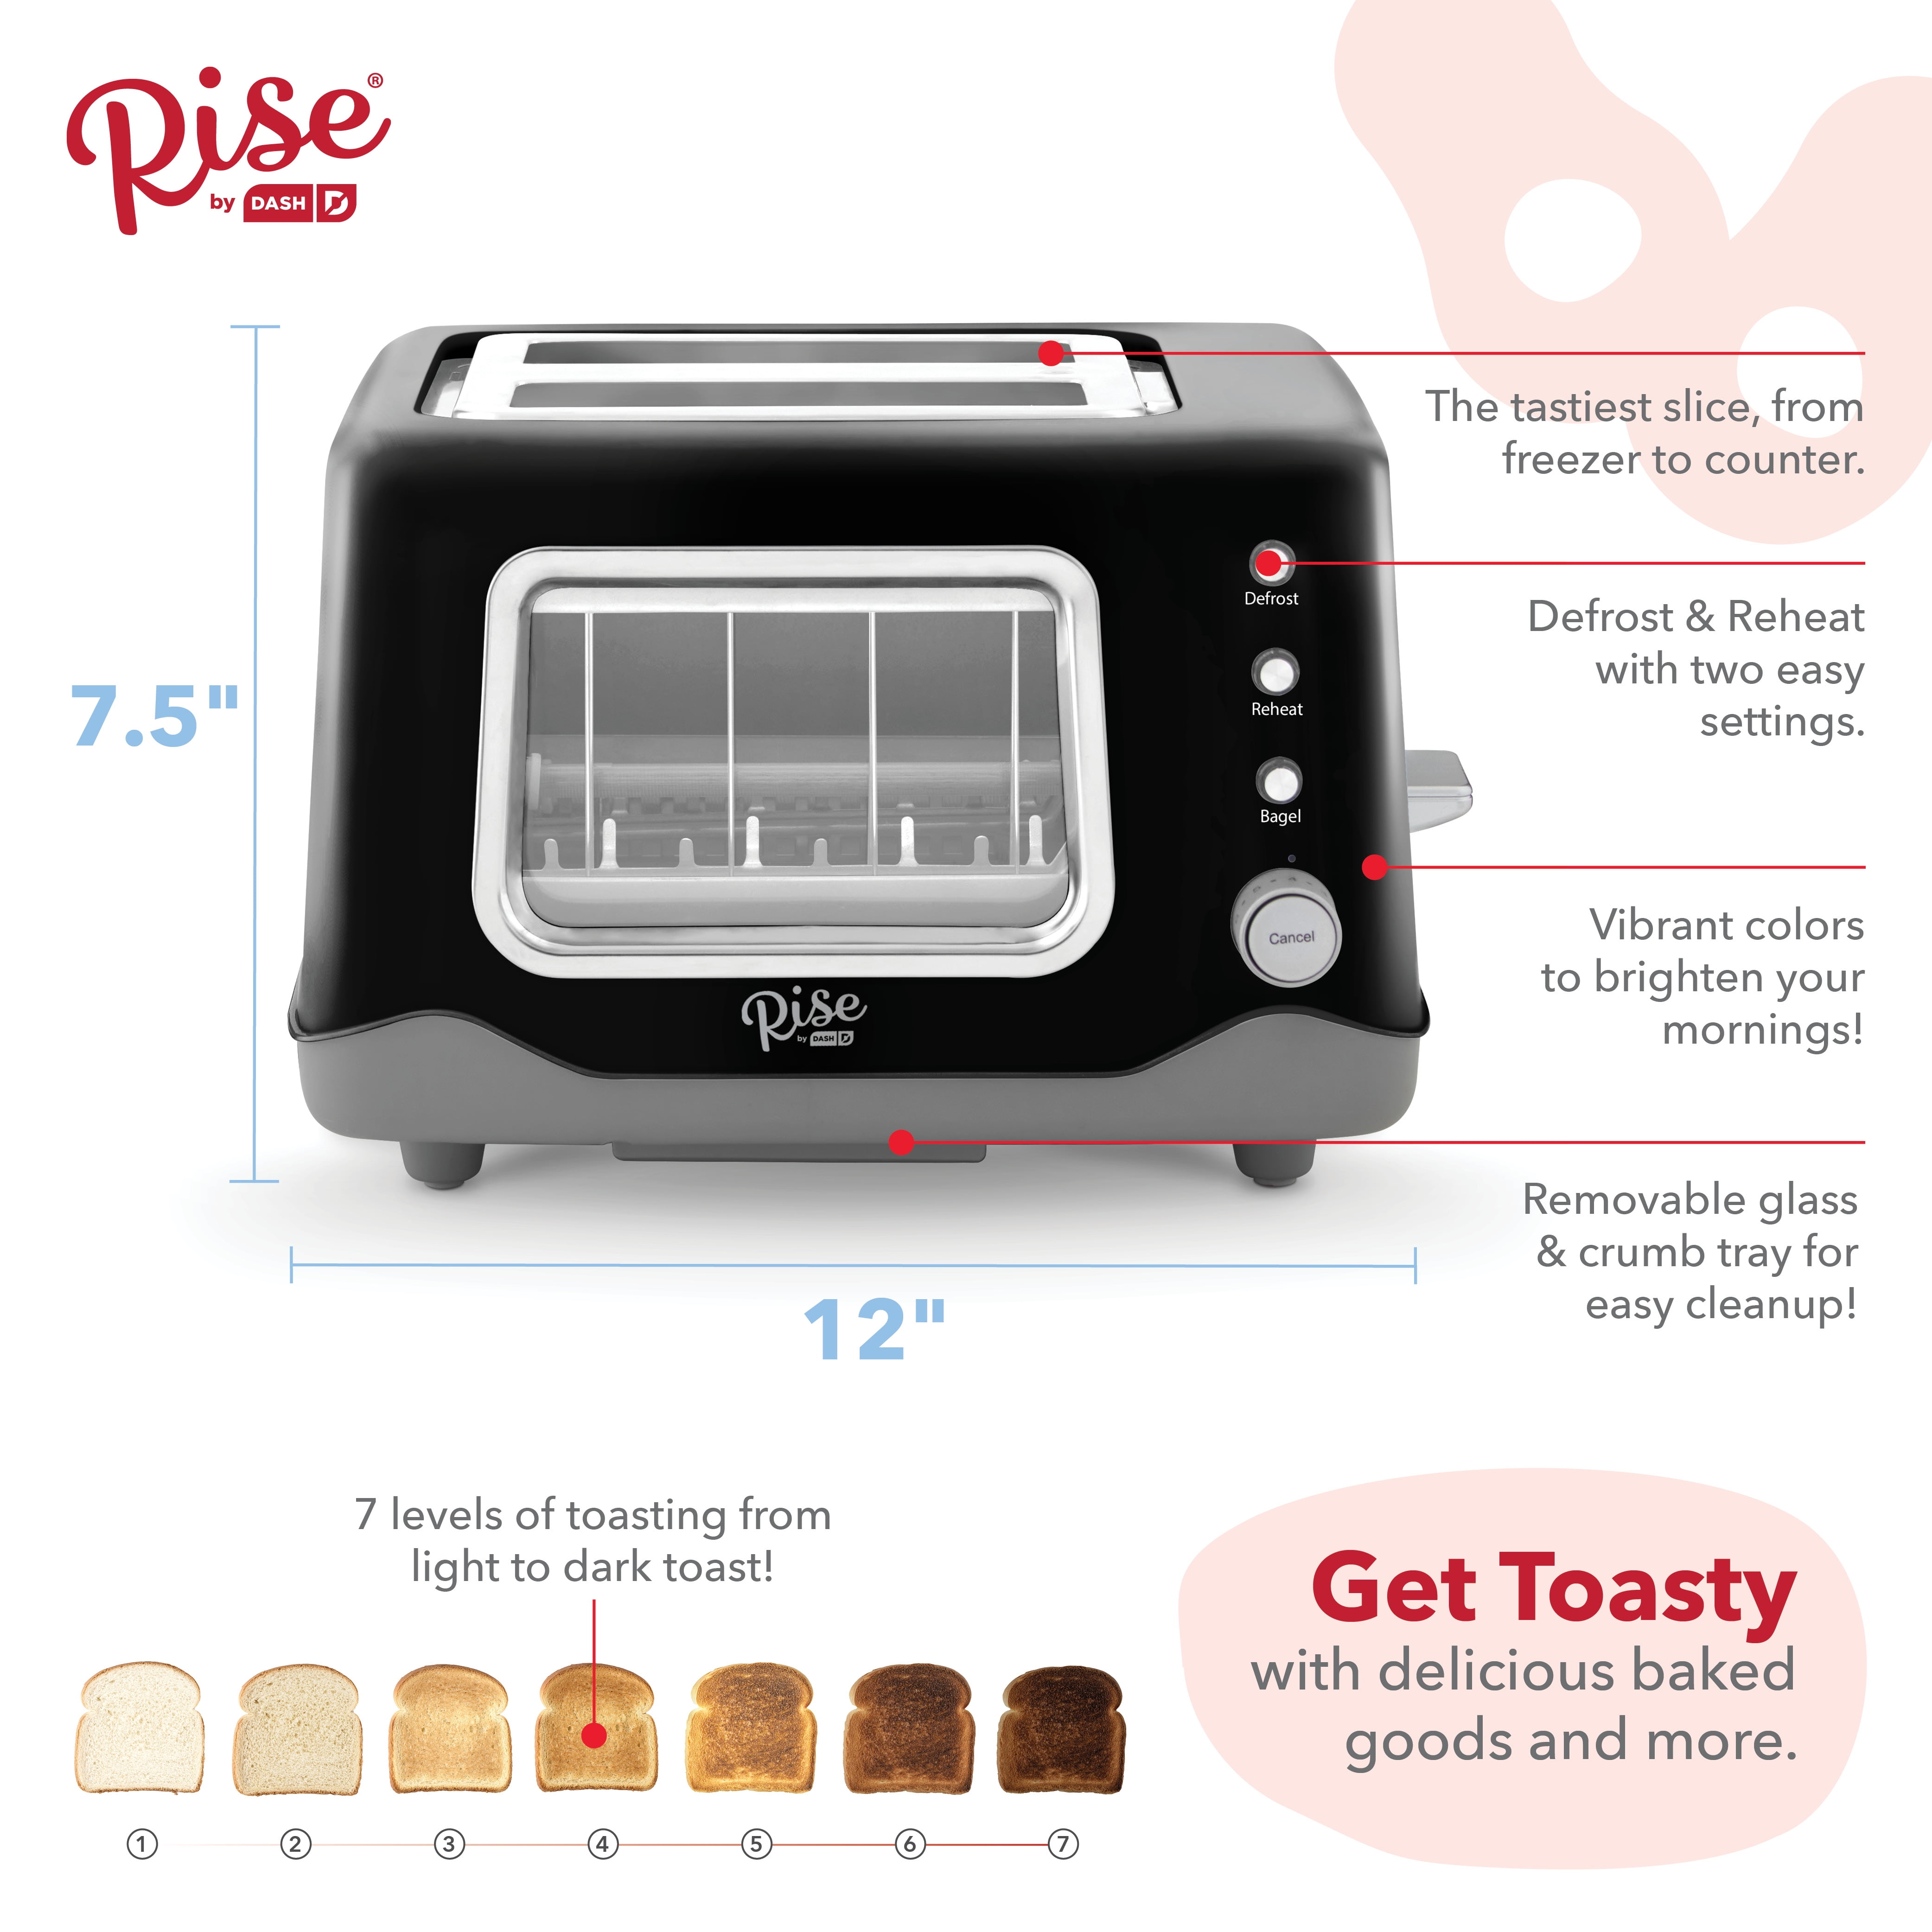 1 Homewell 2 Slice Long Slot Clear View Toaster With Slide Out Glass Panels  & 7 Toast Settings, Perfect For Bagels, Specialty Brea